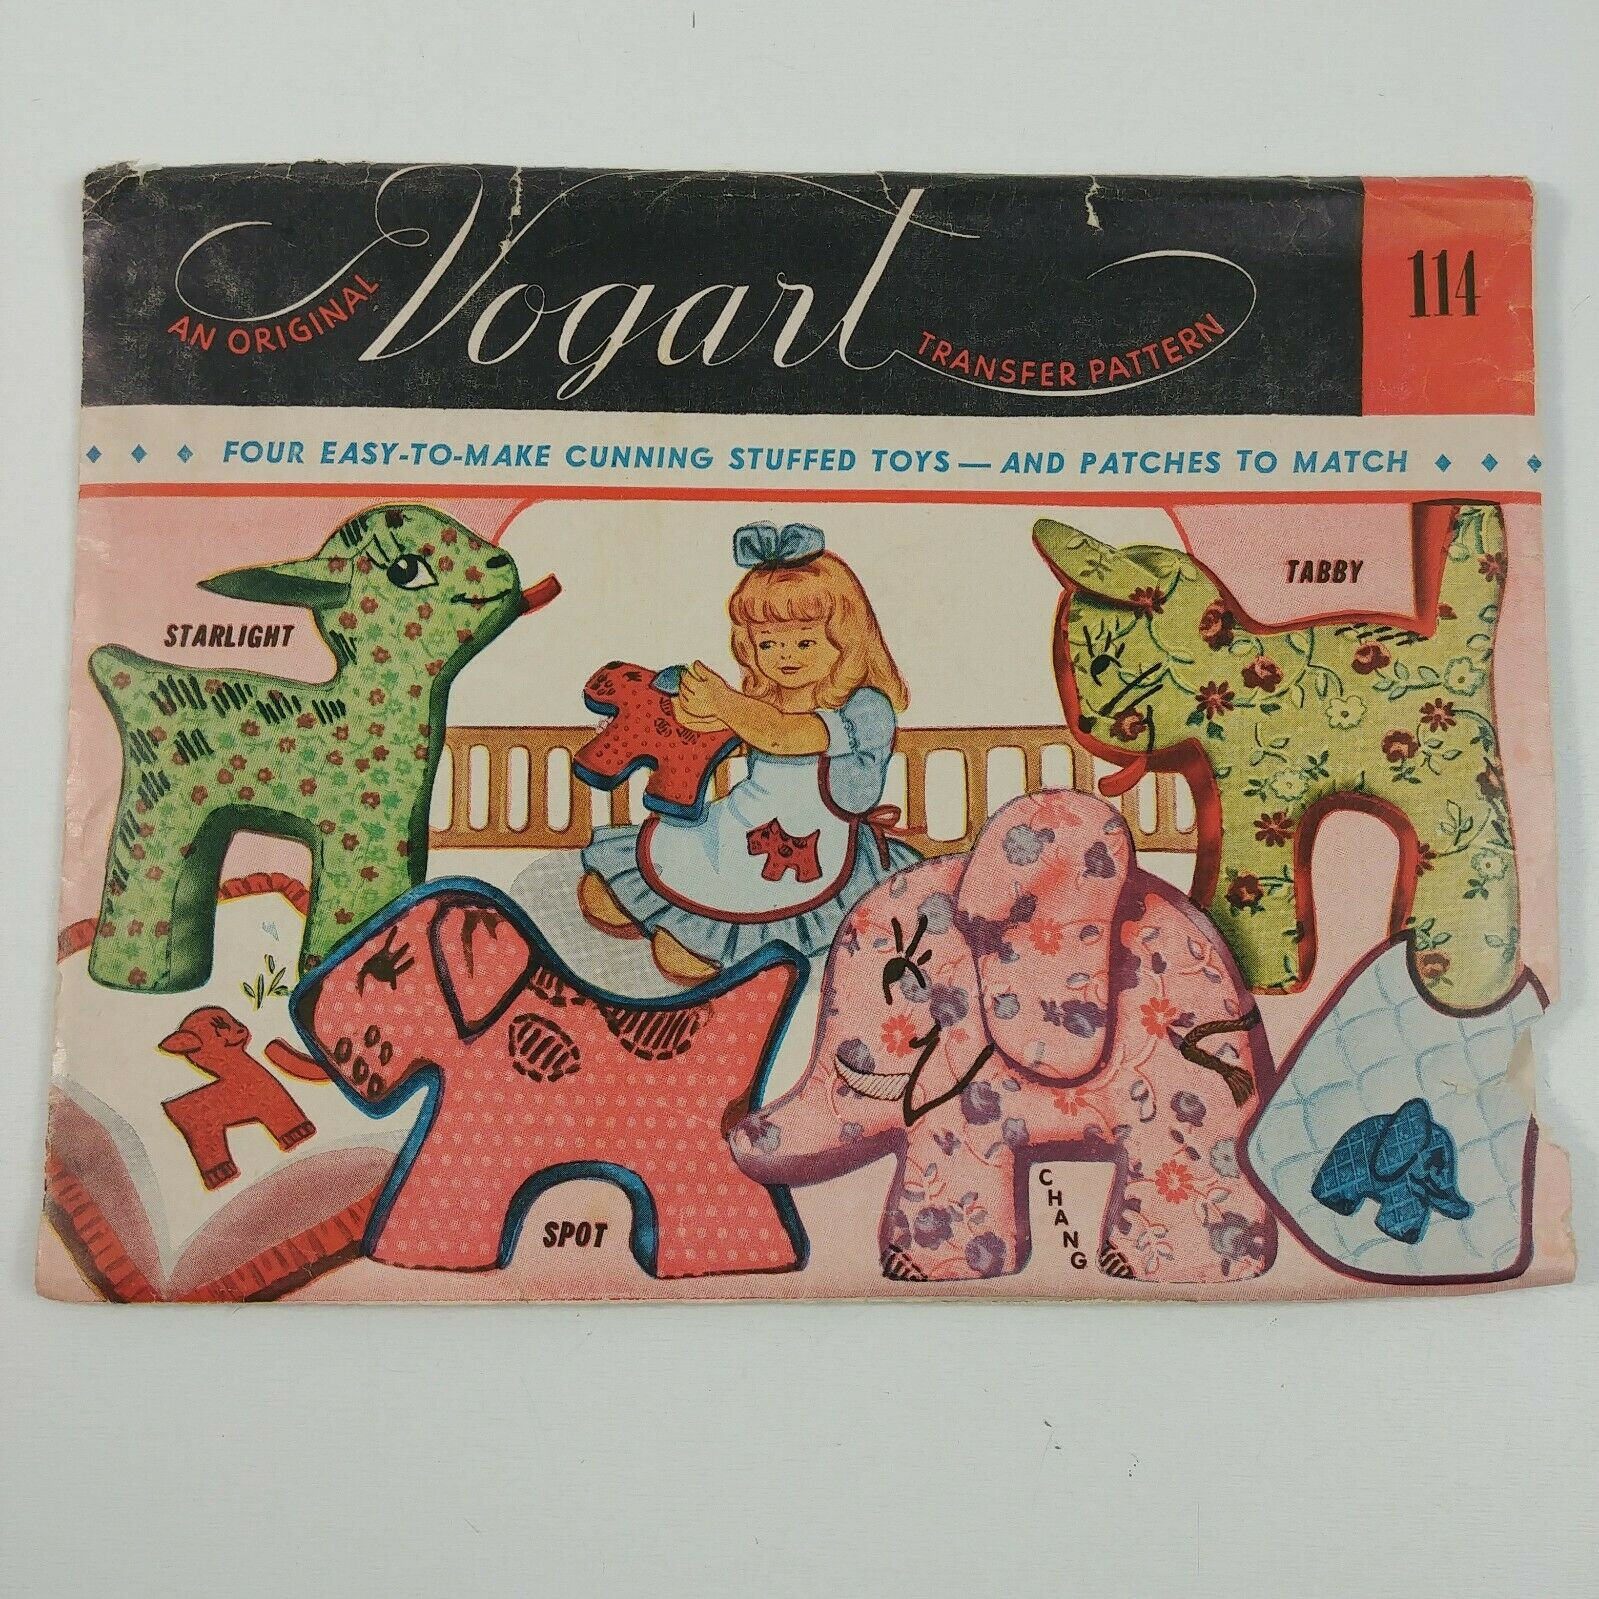 Vintage Embroidery Transfer Patterns Vogart 114 Stuffed Animal Toys Appliques Embroidery Transfer Pattern Vintage